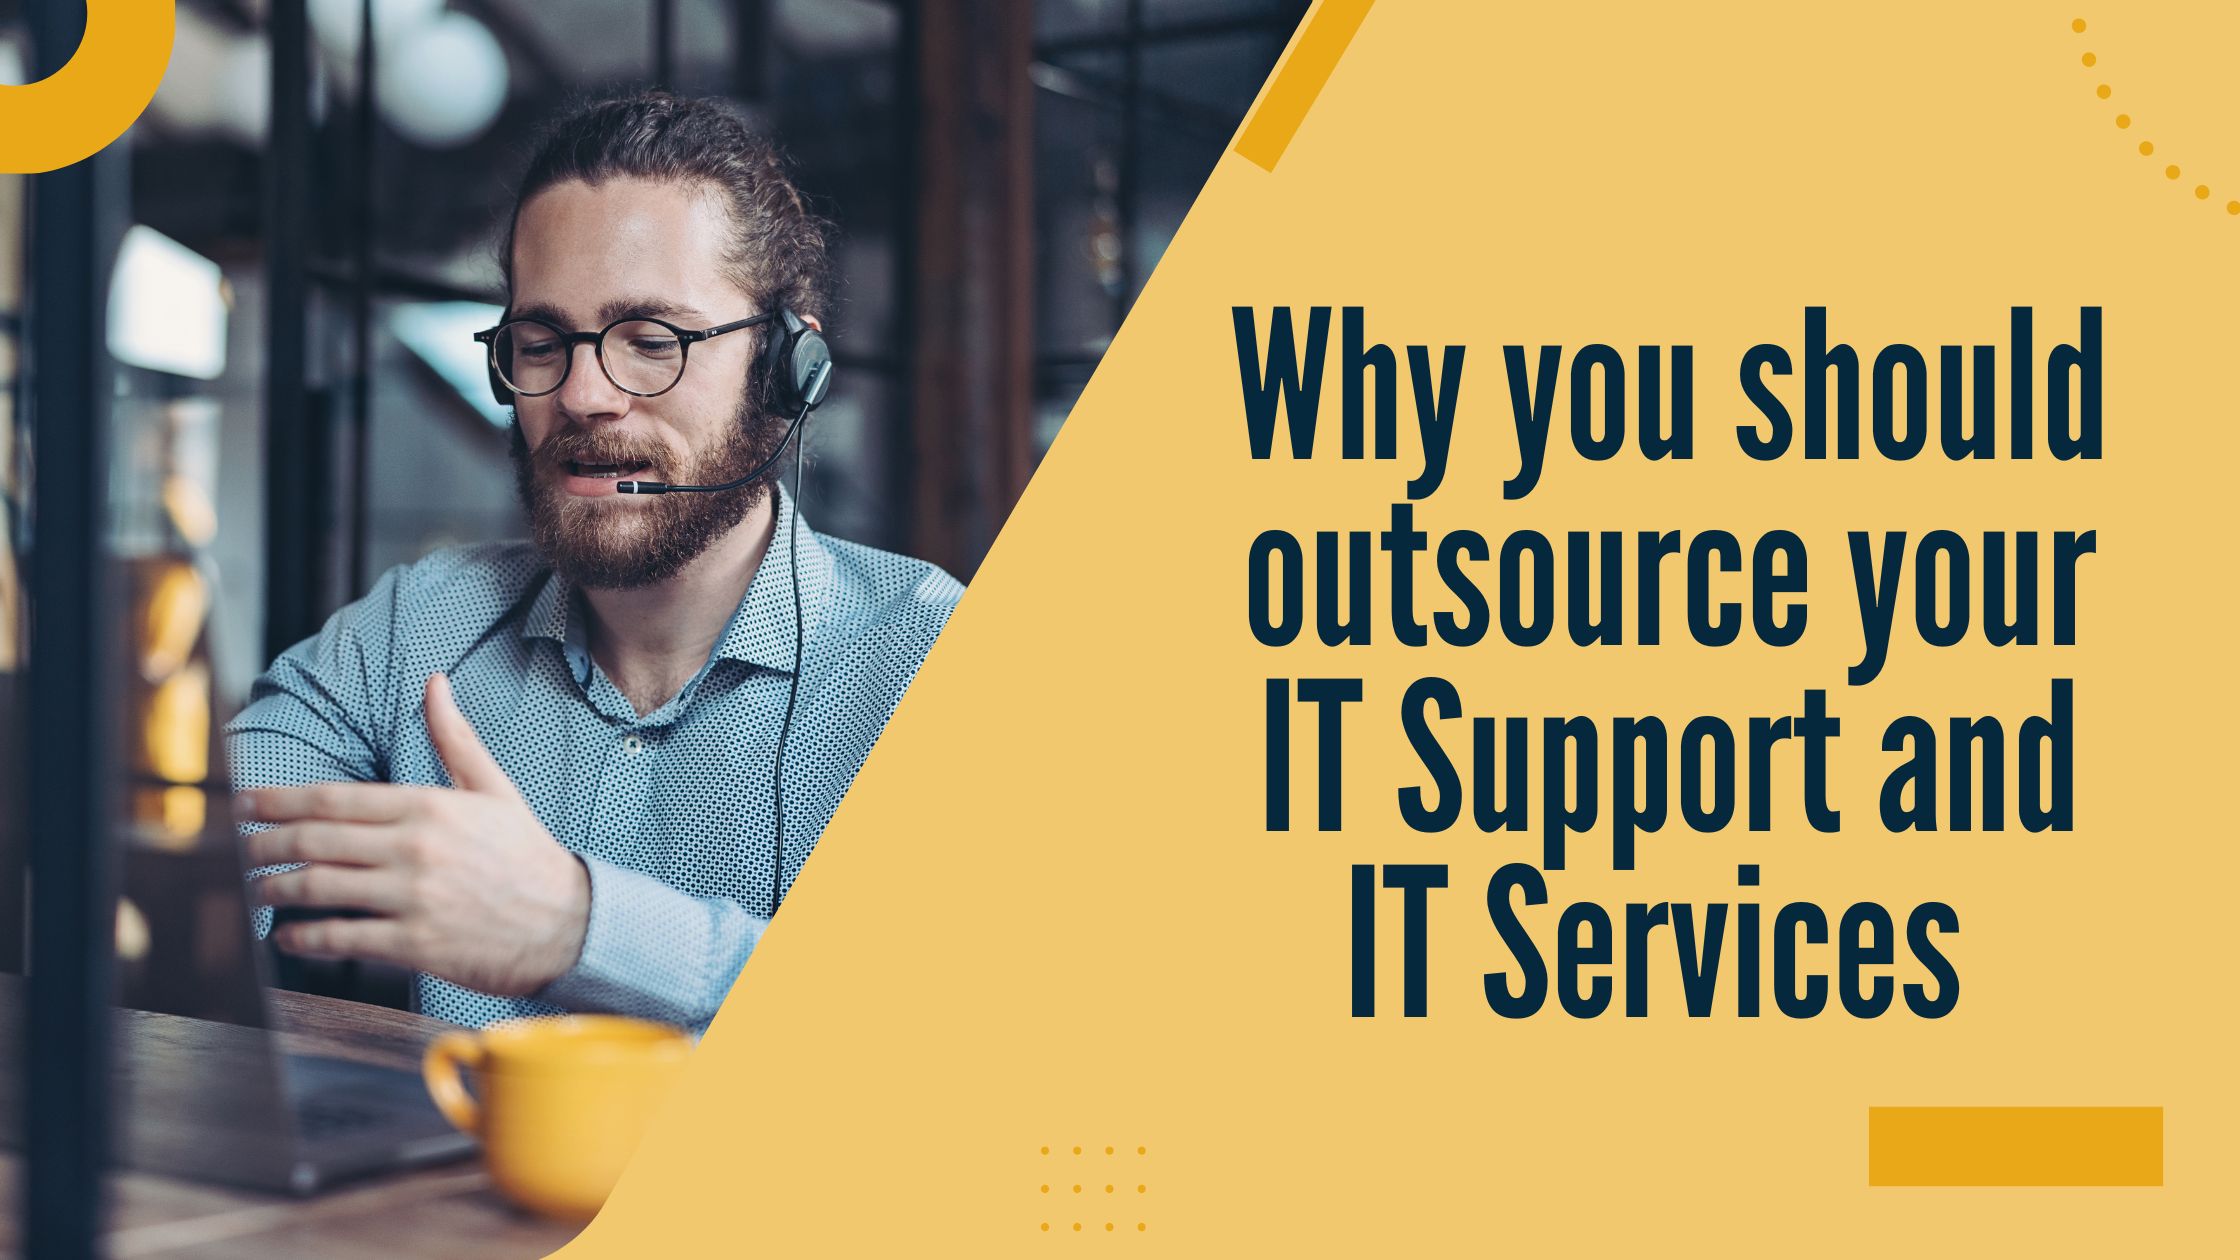 Why you should out source your IT Support and IT Services